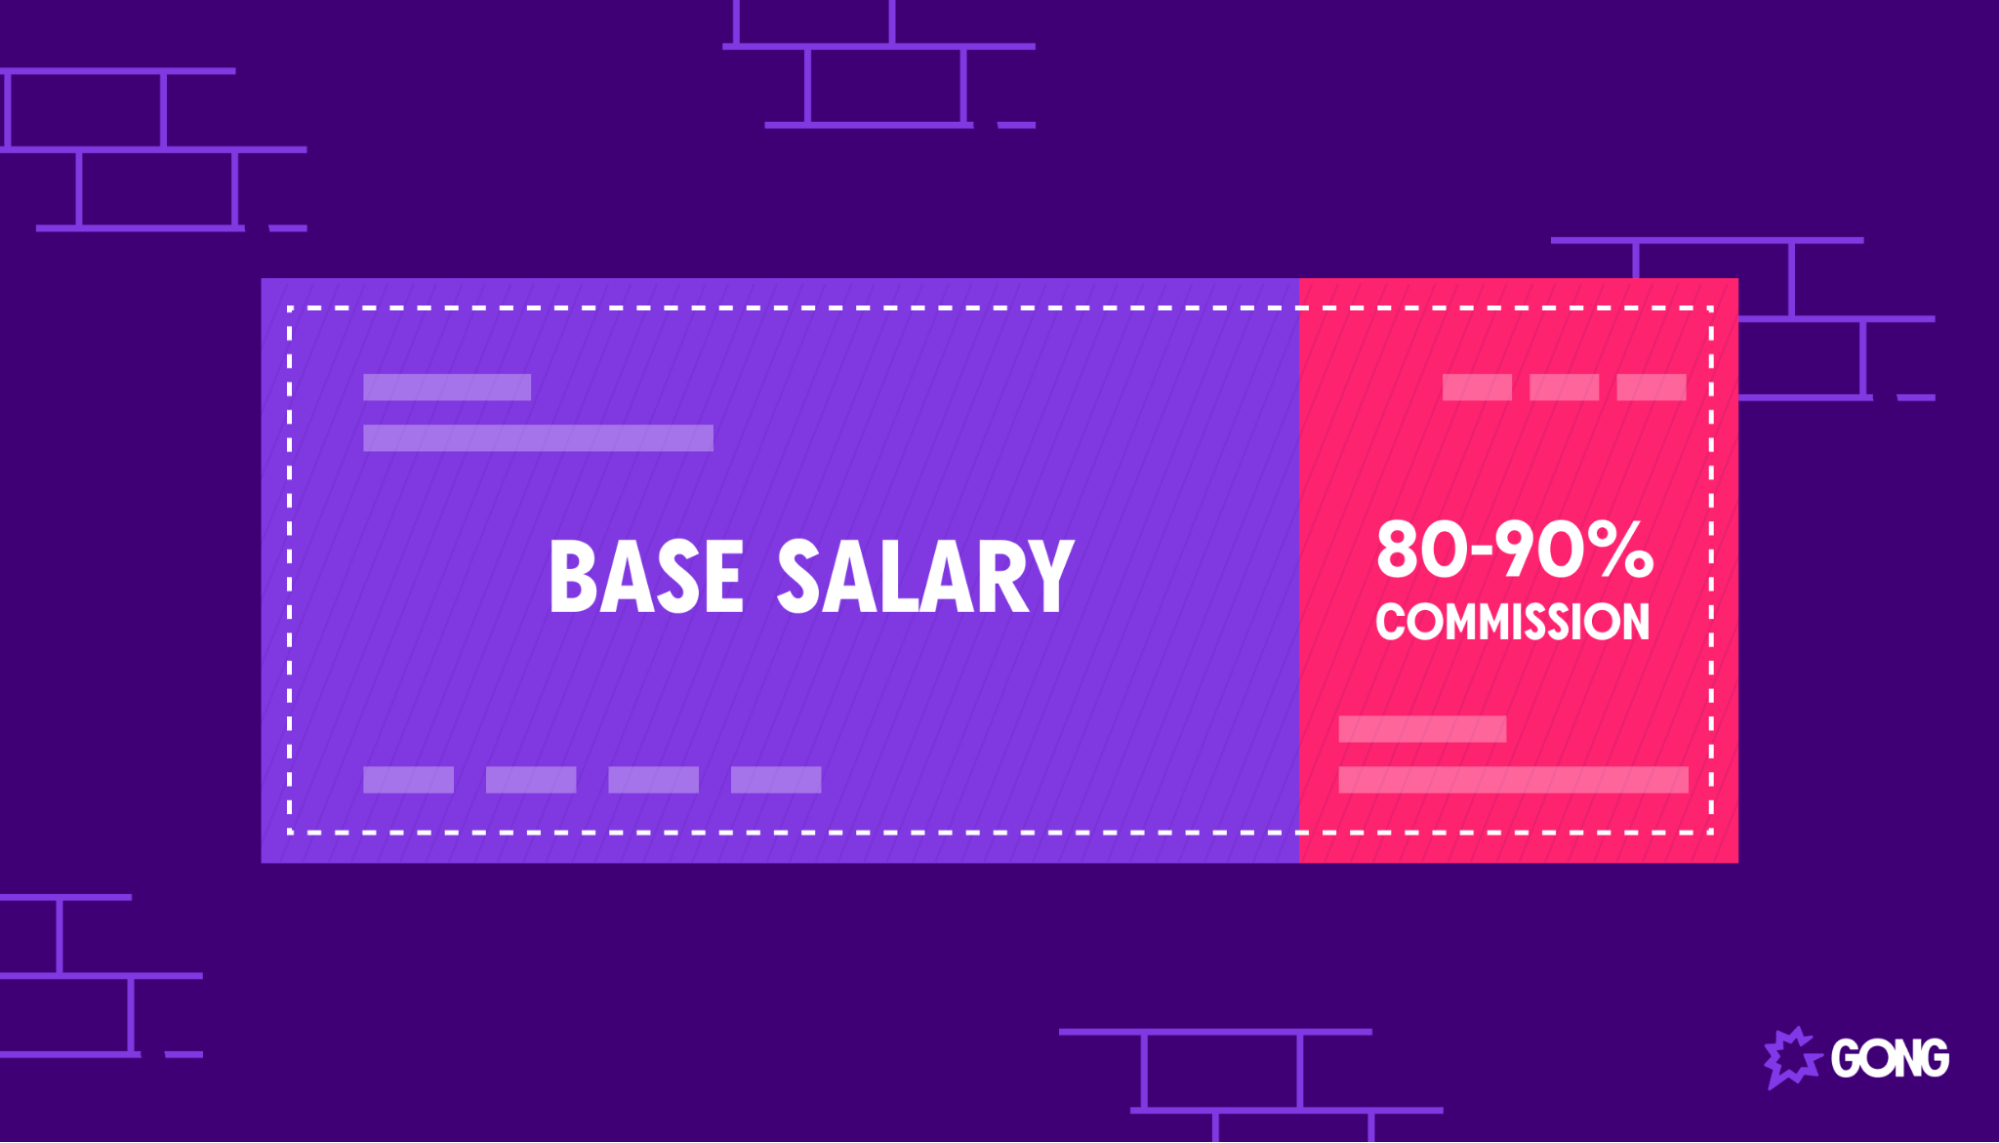 An image depicting a base salary in addition to an 80-90% commission